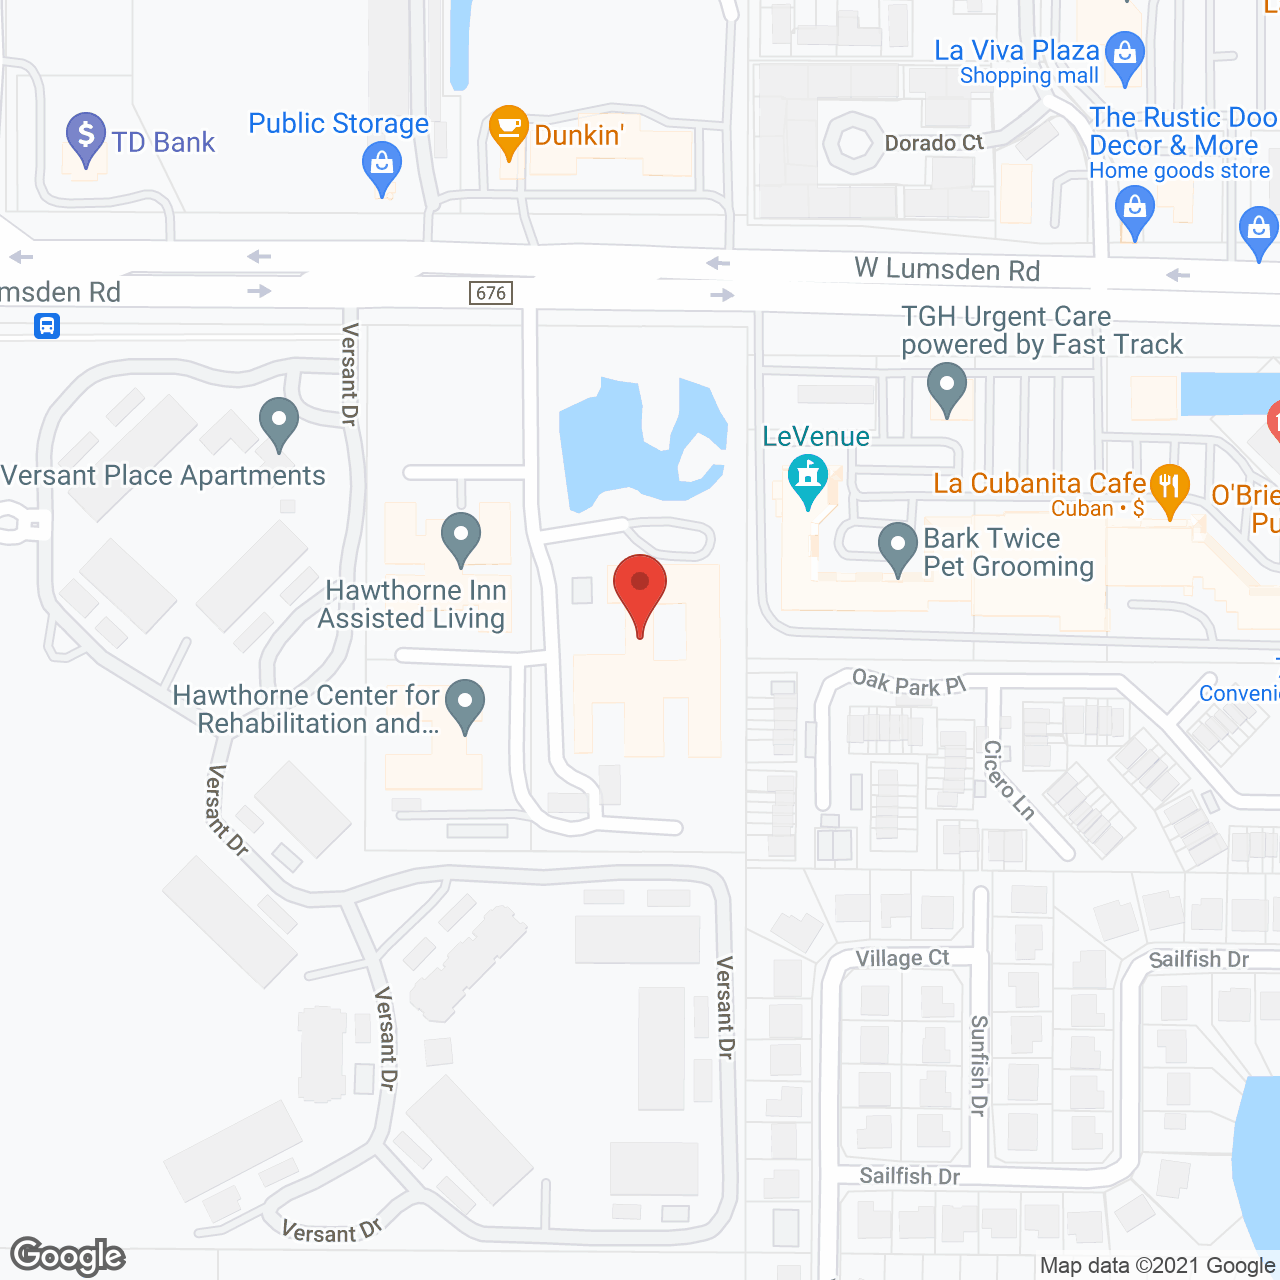 Hawthorne Care Ctr in google map